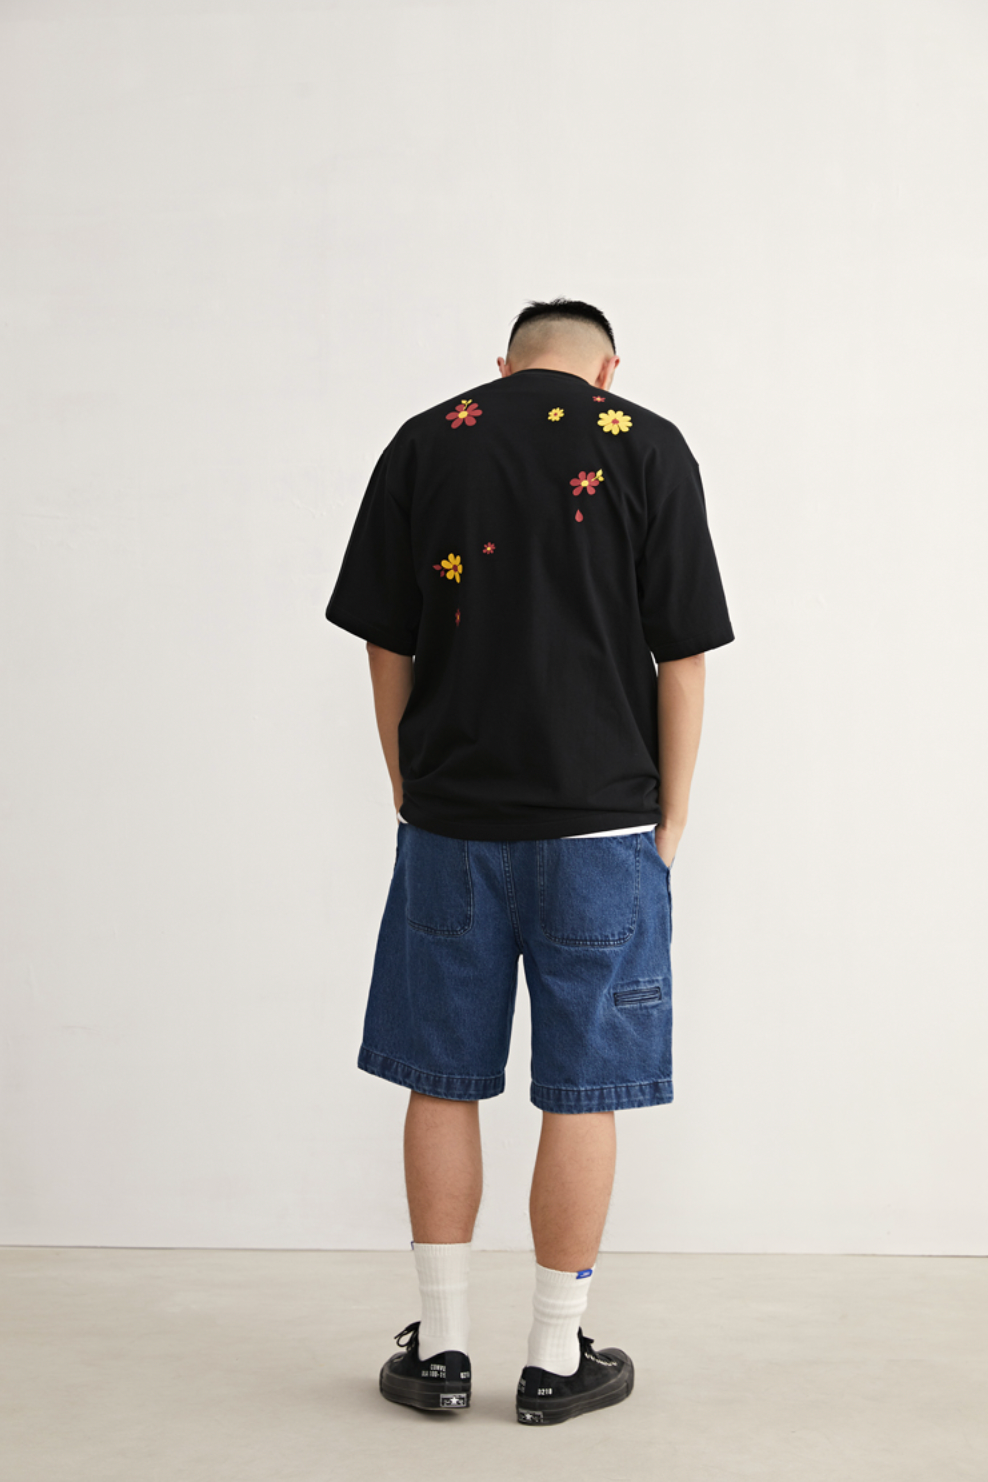 Wassup House Floral Print Tee